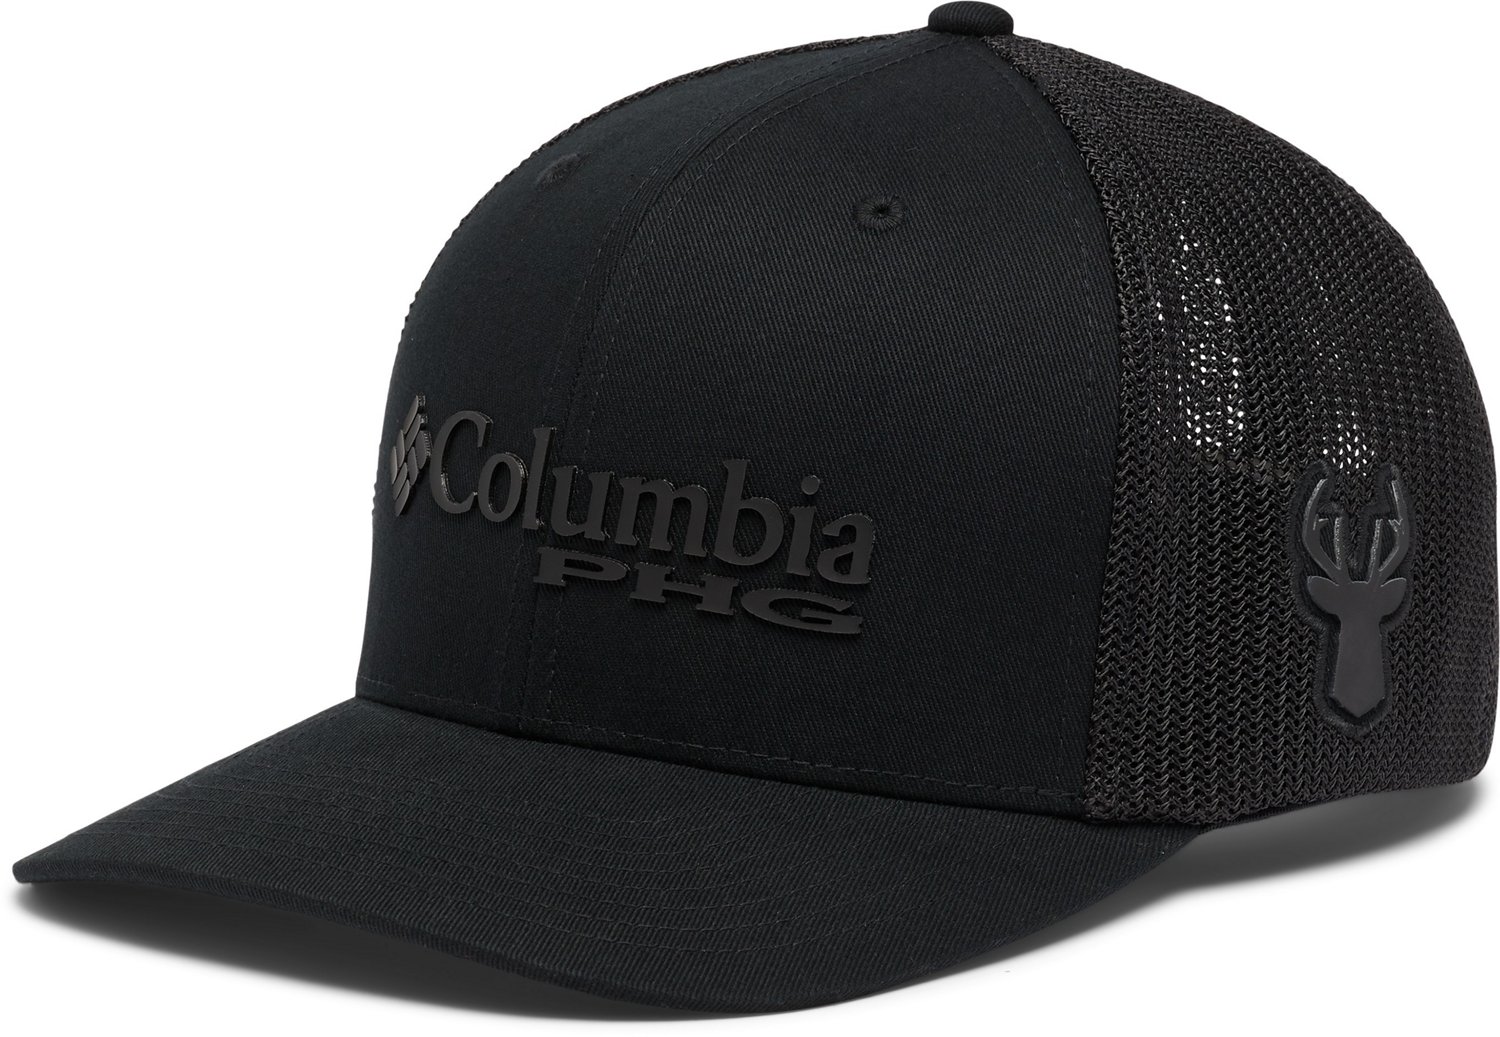 Columbia Clothing Accessories